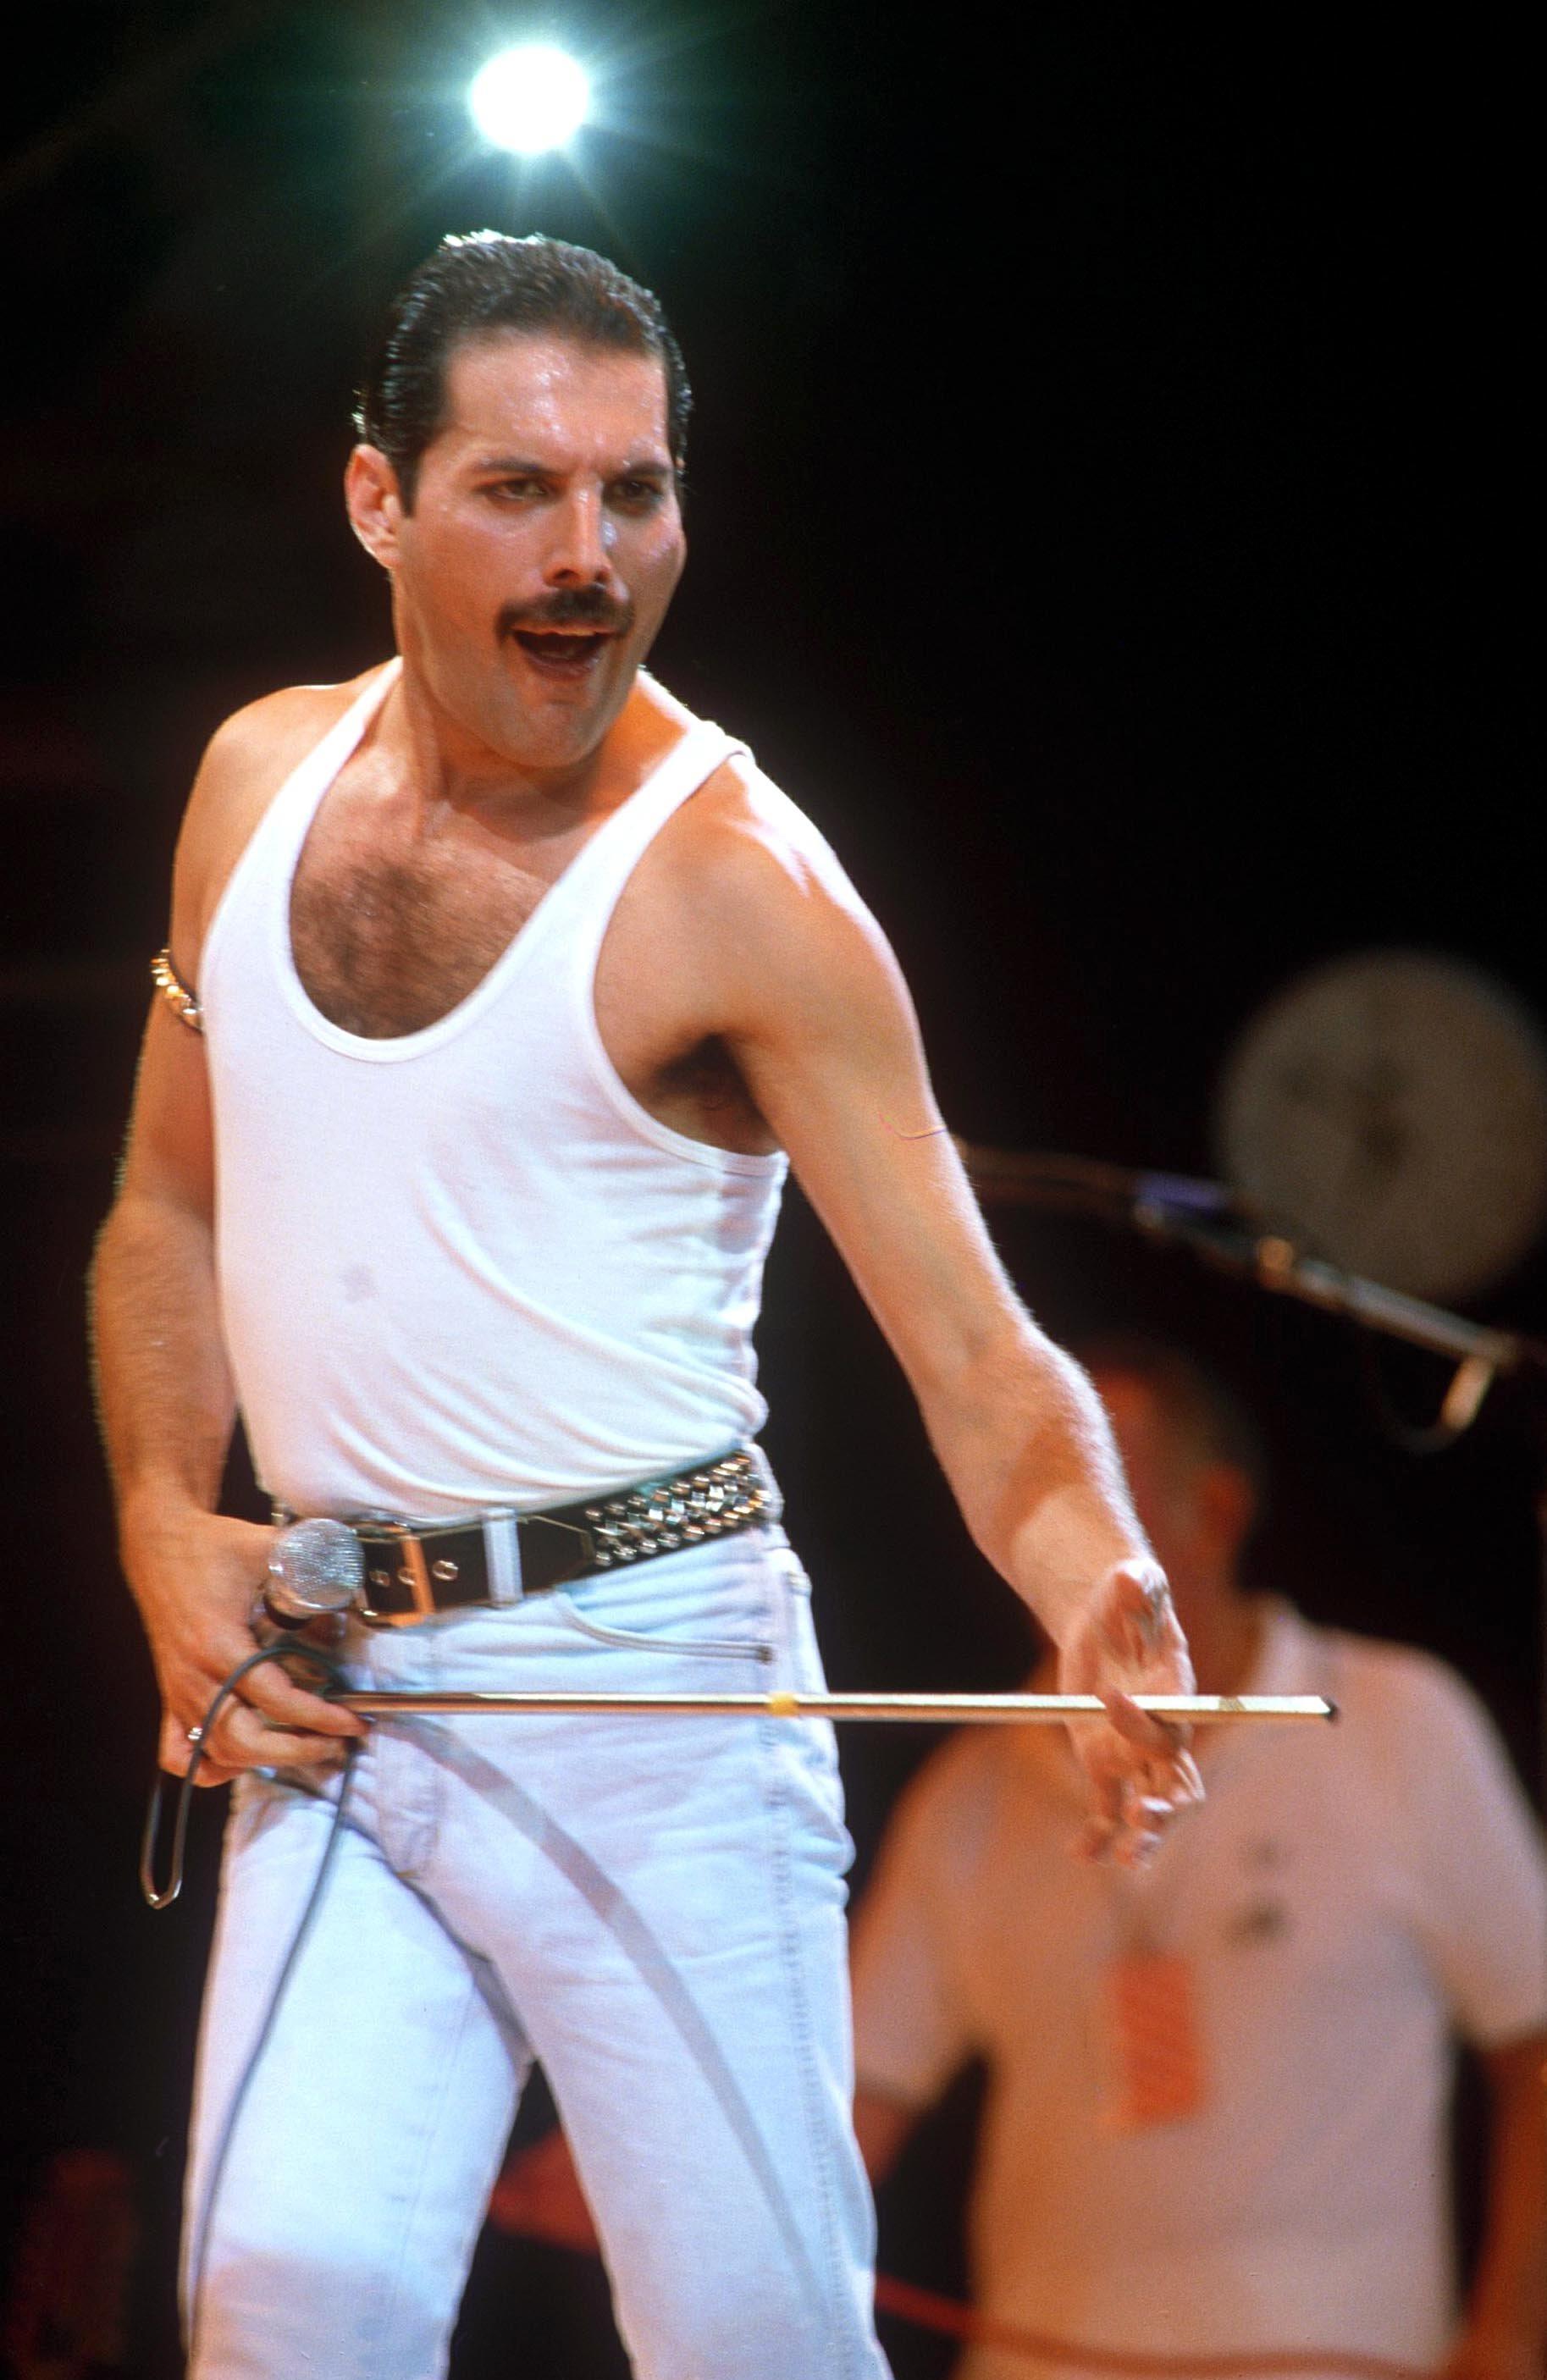 Freddie Mercury was gay died from pneumonia resulting from AIDS